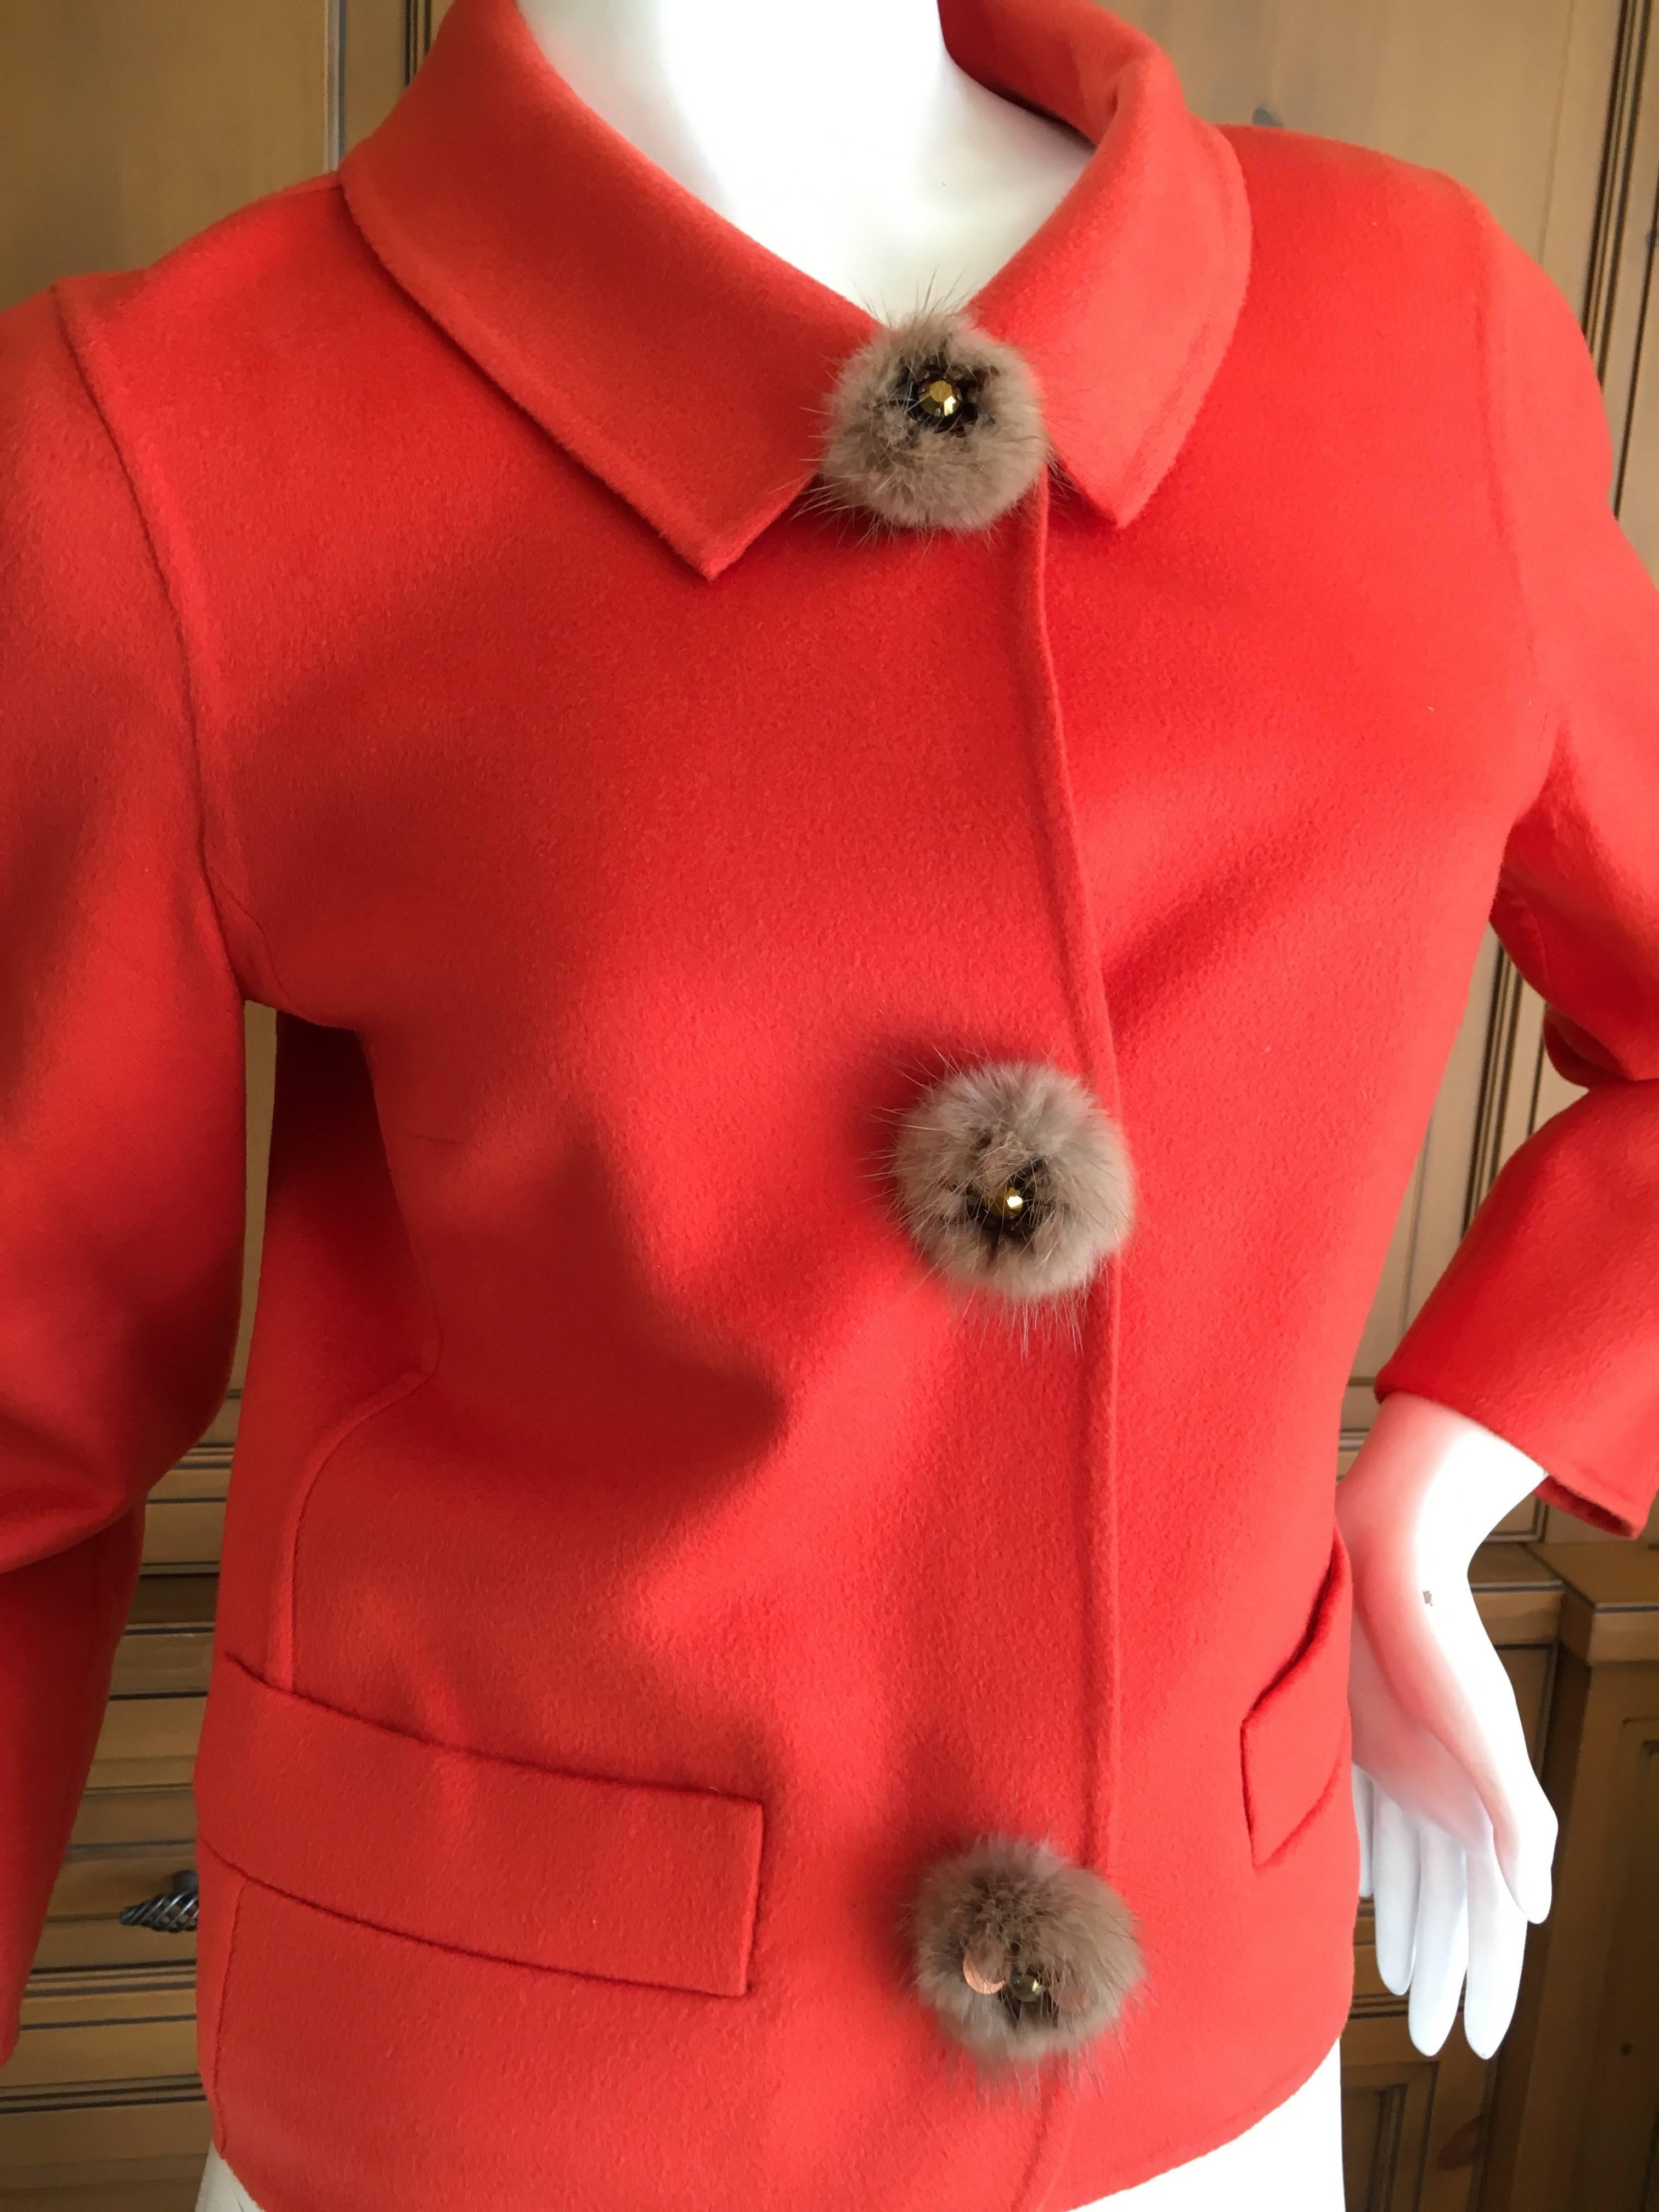 Christian Dior Orange Doubleface Cashmere Jacket with Mink Jeweled Buttons 3